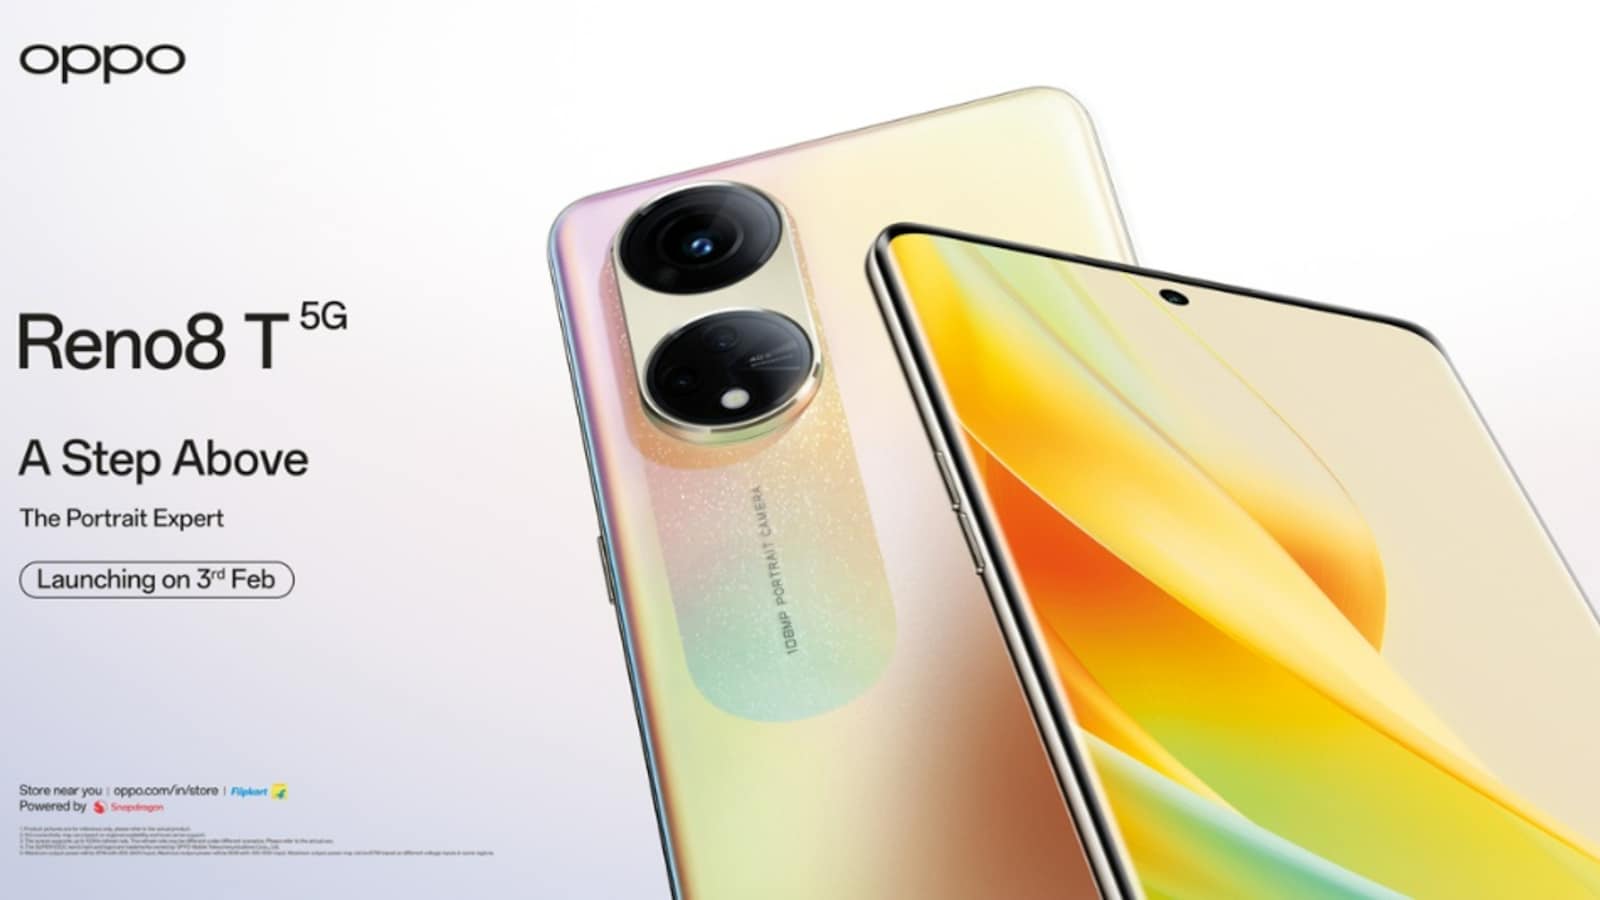 Oppo Reno 8T is priced at Rs 29,999: All you need to know – India TV